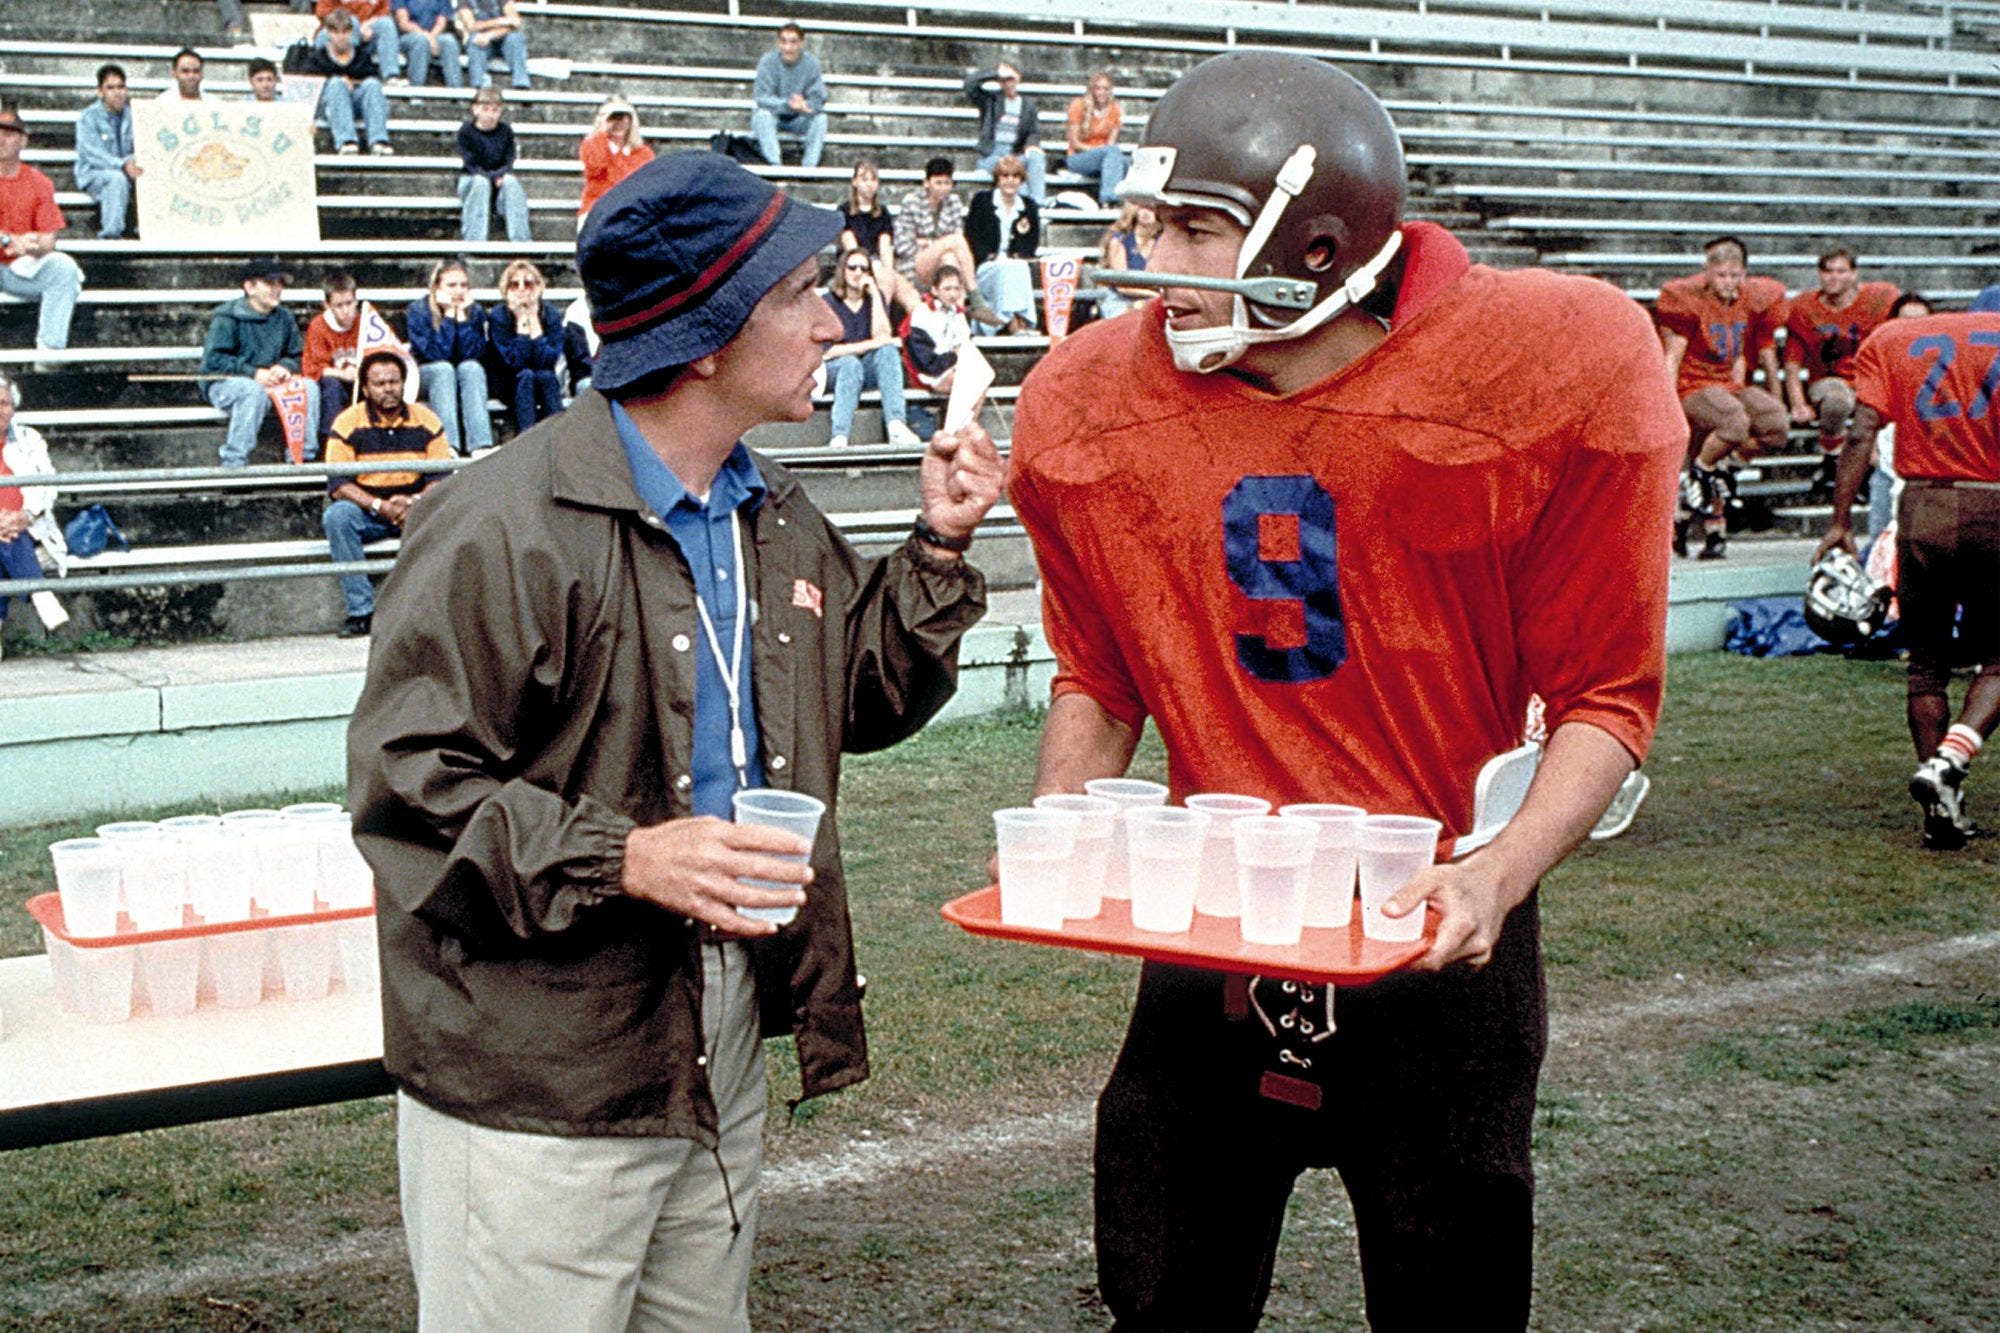 The Waterboy, Filming Locations, Then & Now 24 Years Later